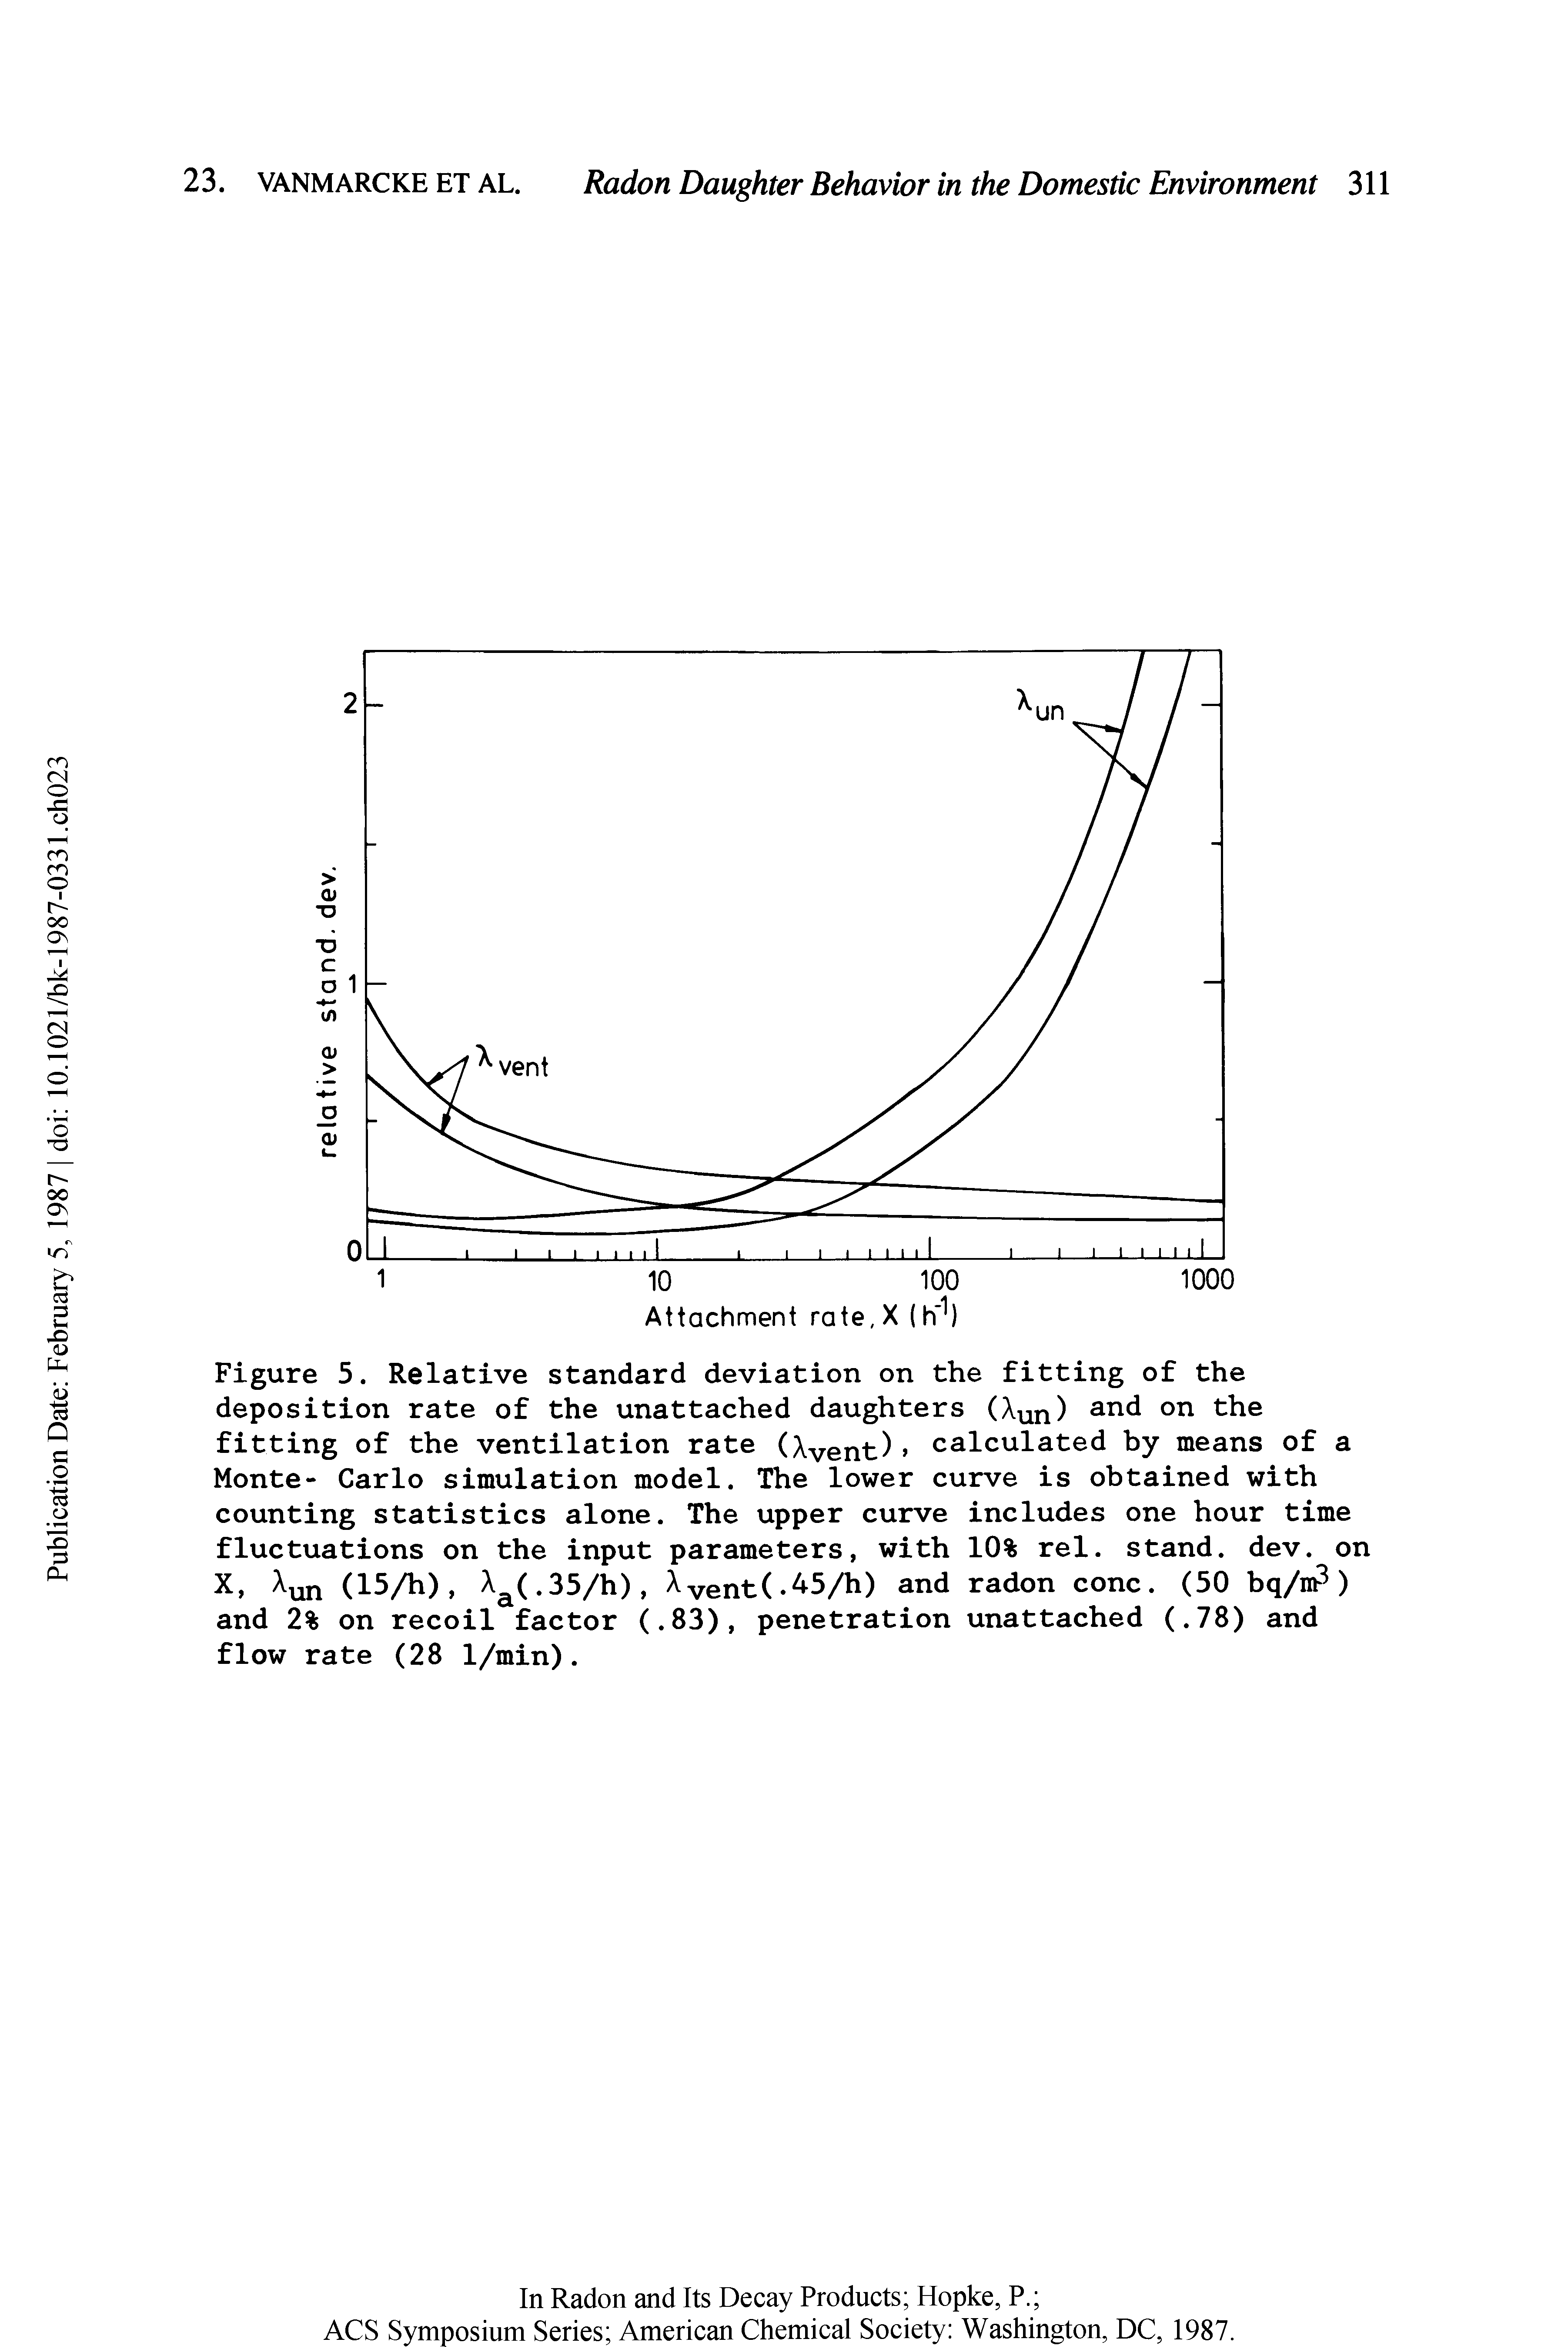 Figure 5. Relative standard deviation on the fitting of the deposition rate of the unattached daughters (Xun) and on the fitting of the ventilation rate (Xvent)> calculated by means of a Monte- Carlo simulation model. The lower curve is obtained with counting statistics alone. The upper curve includes one hour time fluctuations on the input parameters, with 10% rel. stand, dev. on X, un (15/h), a(.35/h), Vent(.45/h) and radon cone. (50 bq/m ) and 2% on recoil factor (.83), penetration unattached (.78) and flow rate (28 1/min).